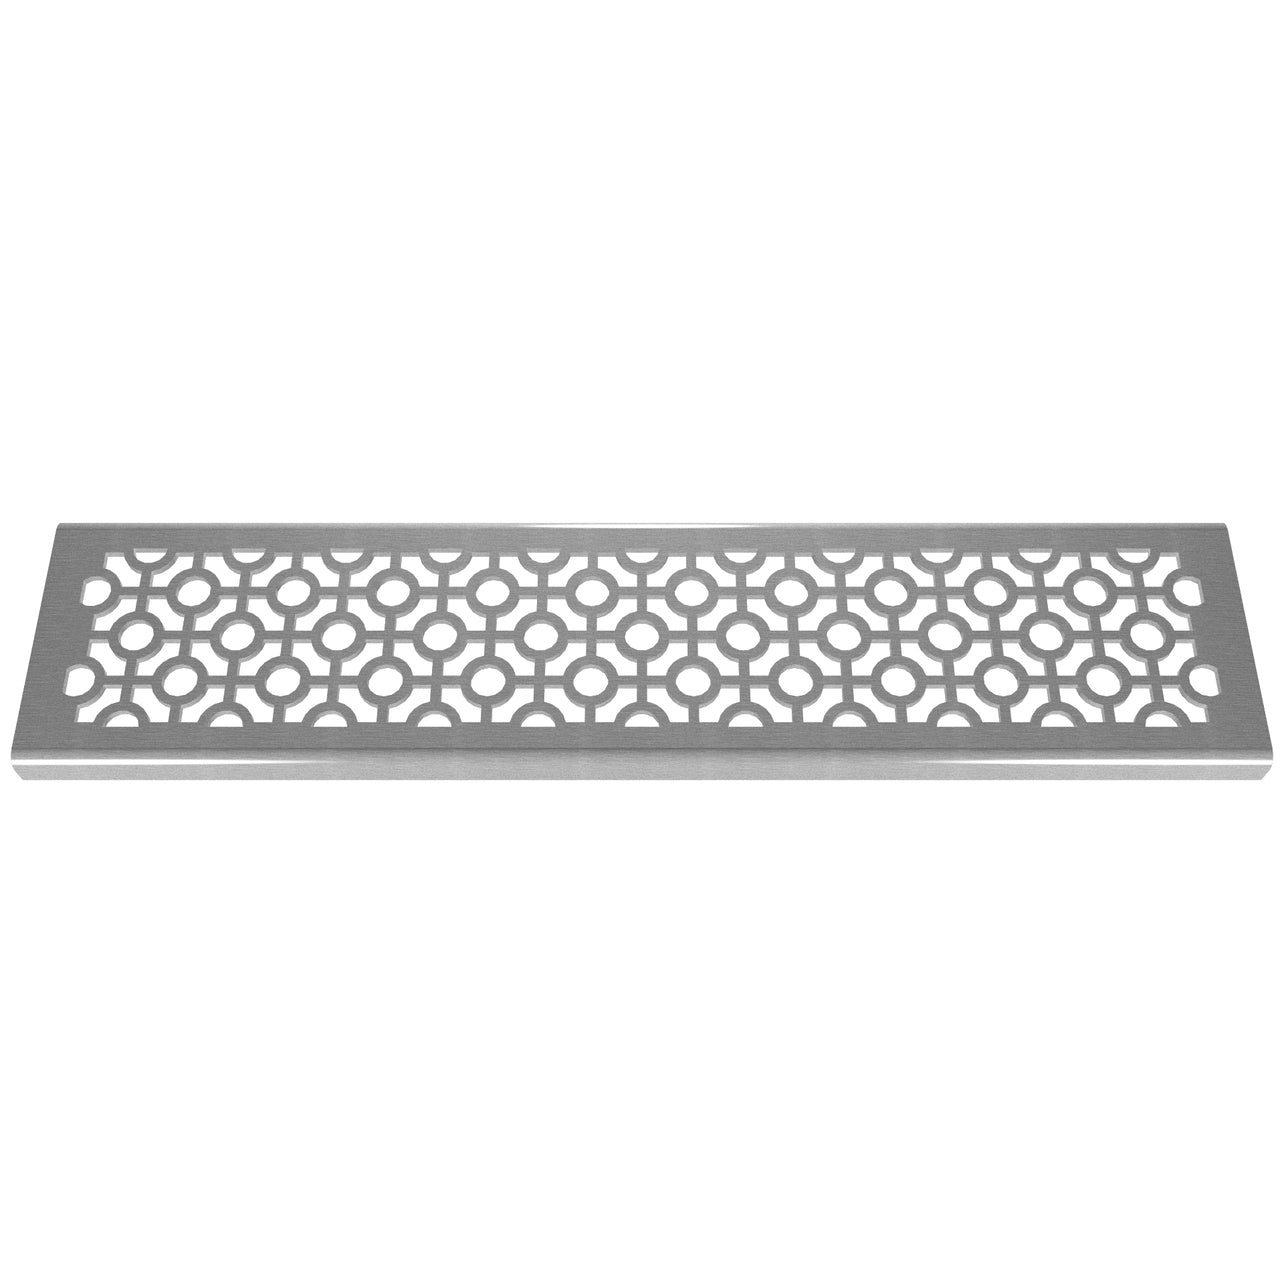 Oxo 304 Stainless Steel Channel Drain Grate 75 x 913mm (3 Inch)